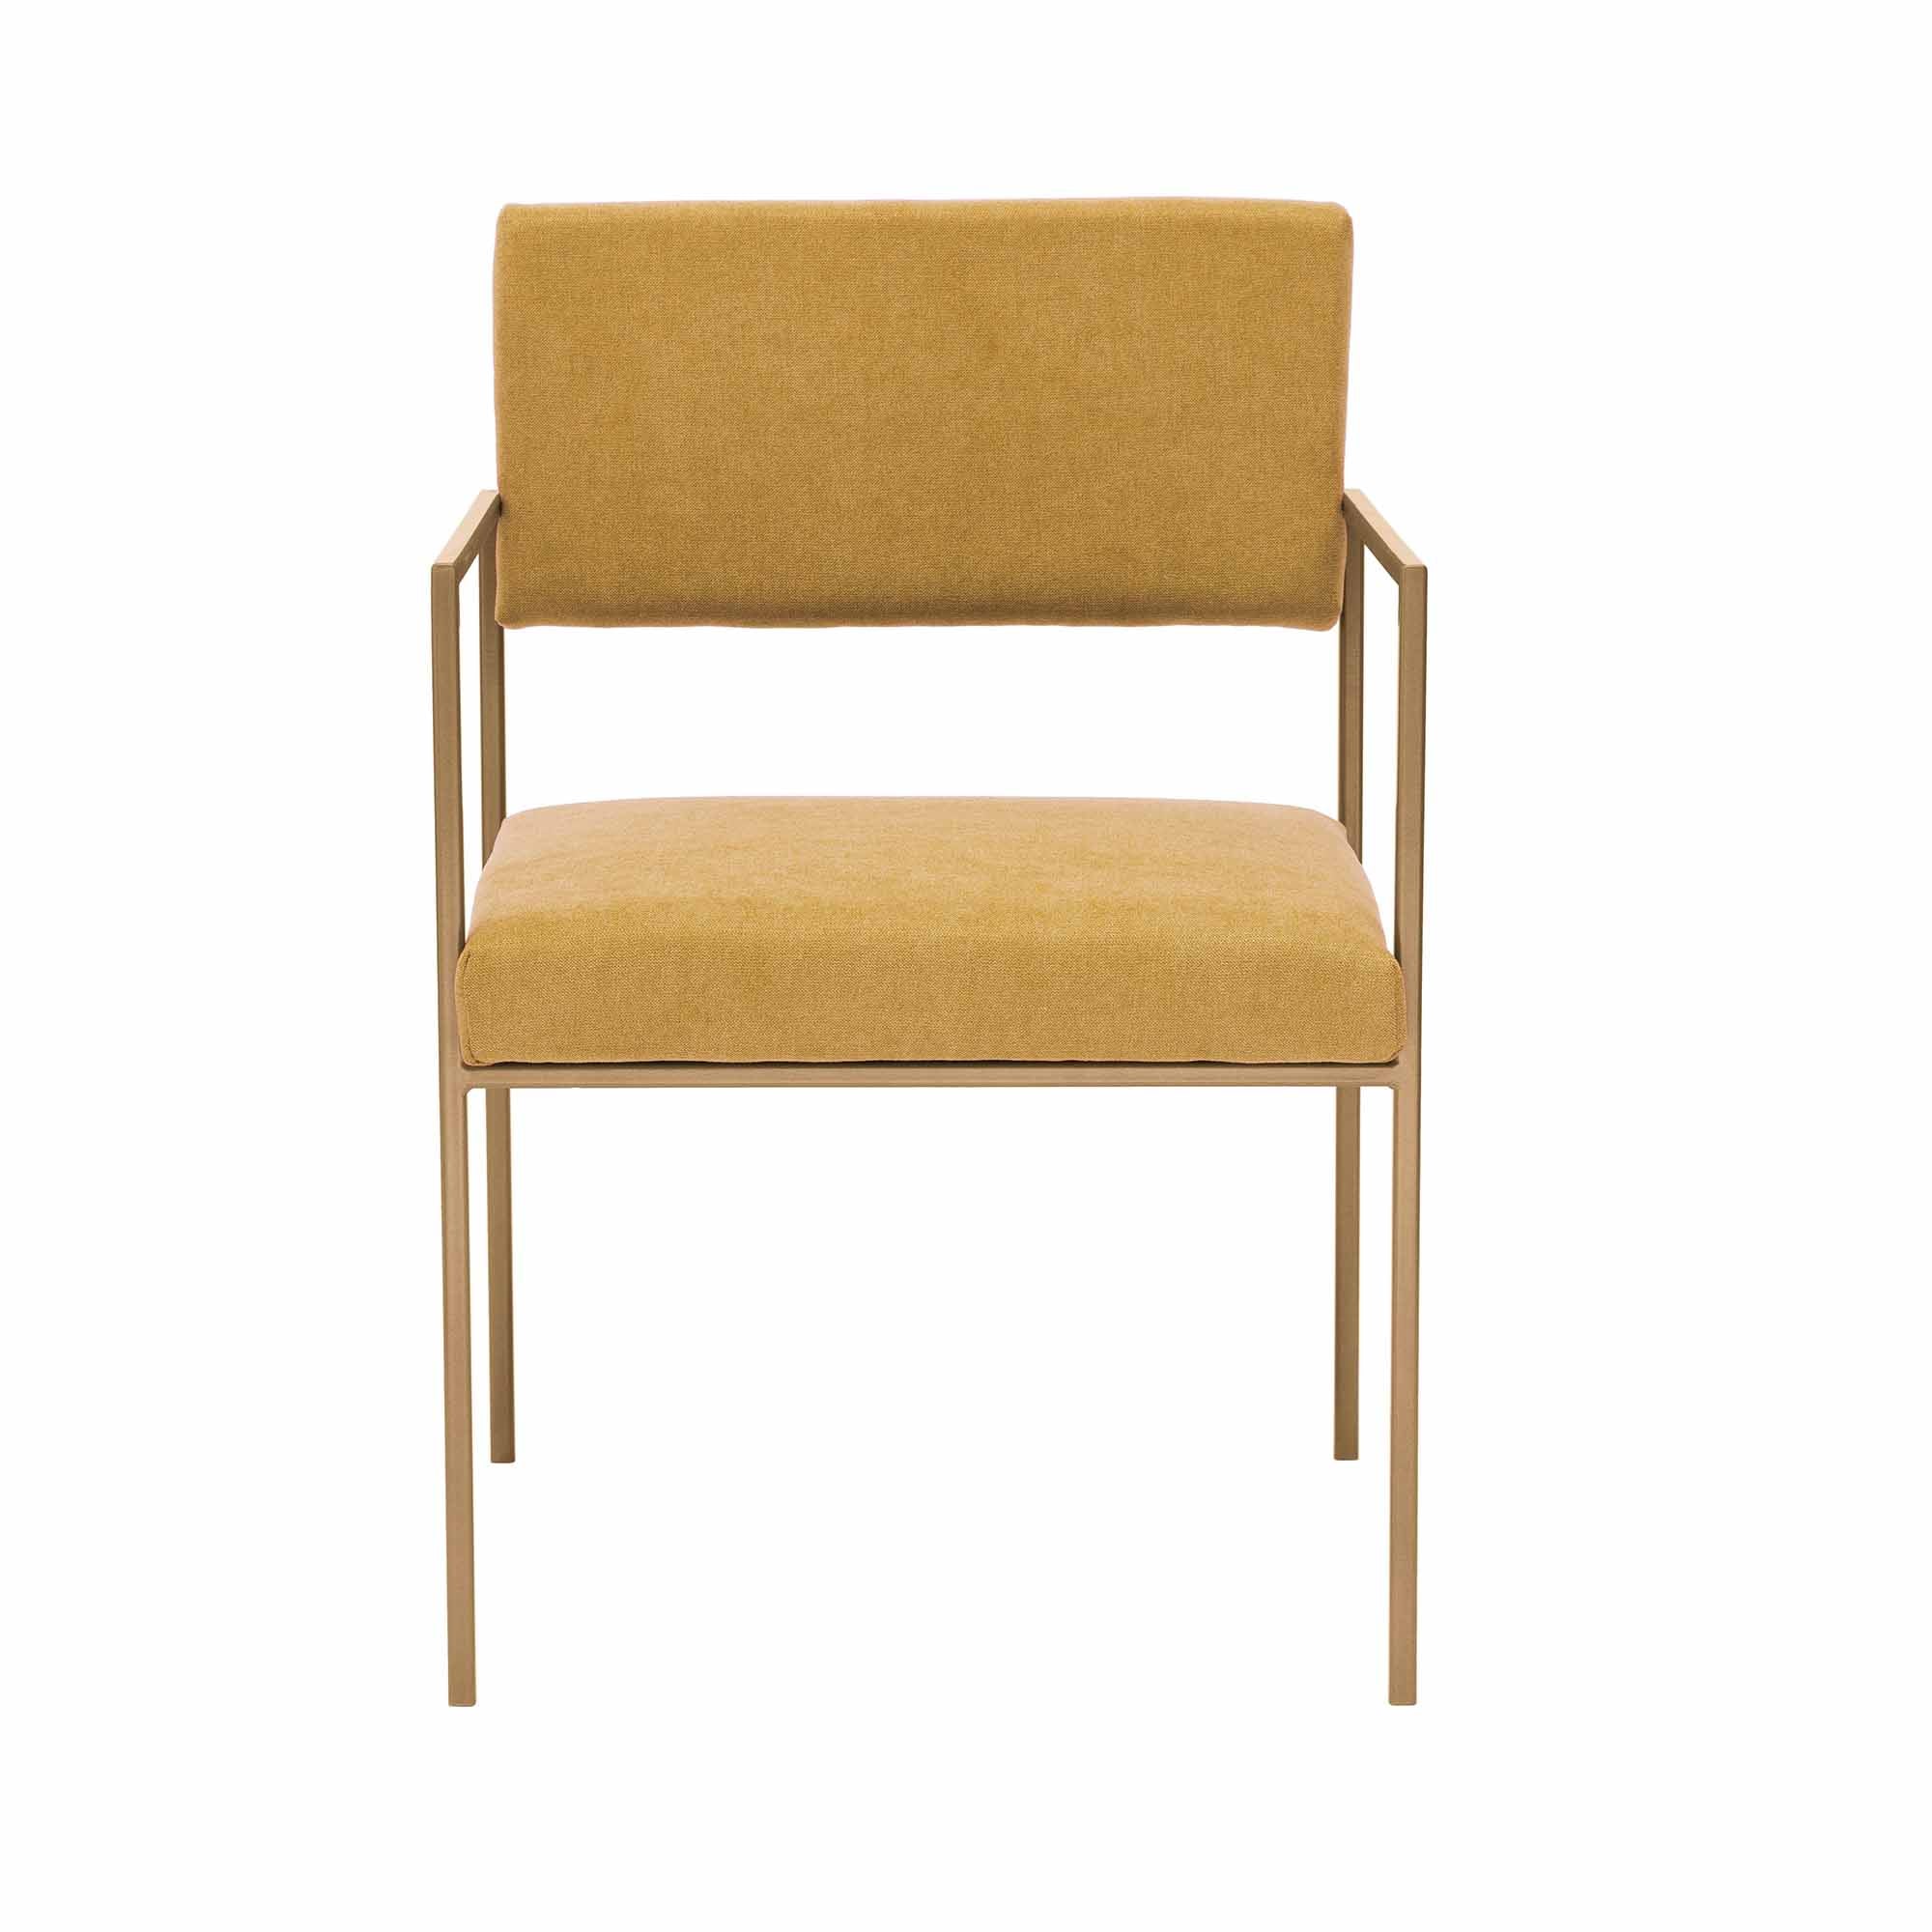 CUBE Armchair, Powder-Coated Steel Frame front view yellow fabric, yellow frame